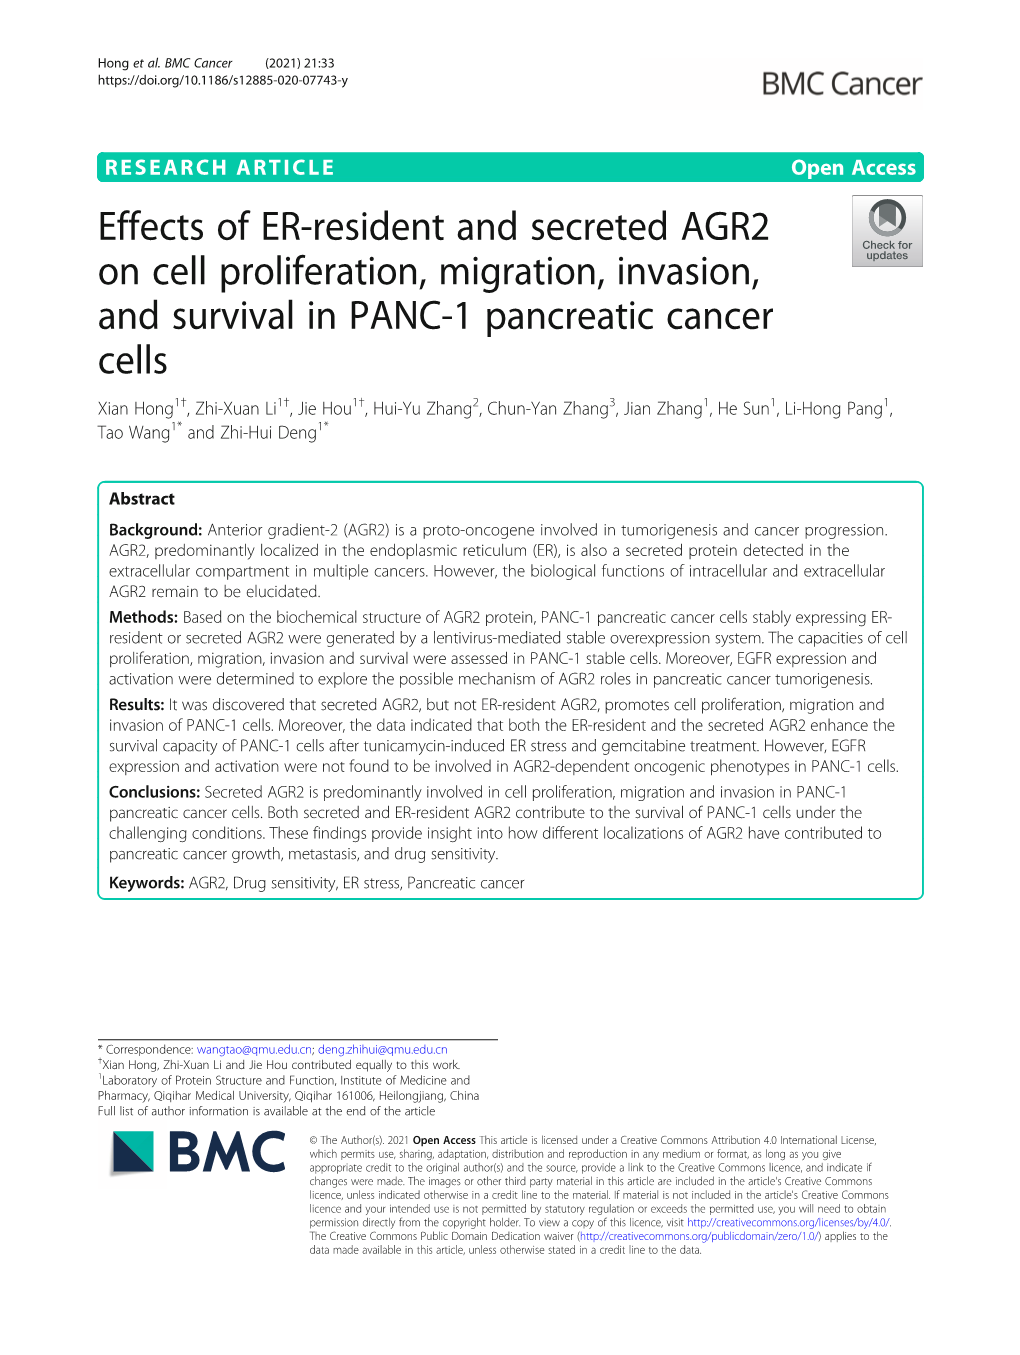 Effects of ER-Resident and Secreted AGR2 on Cell Proliferation